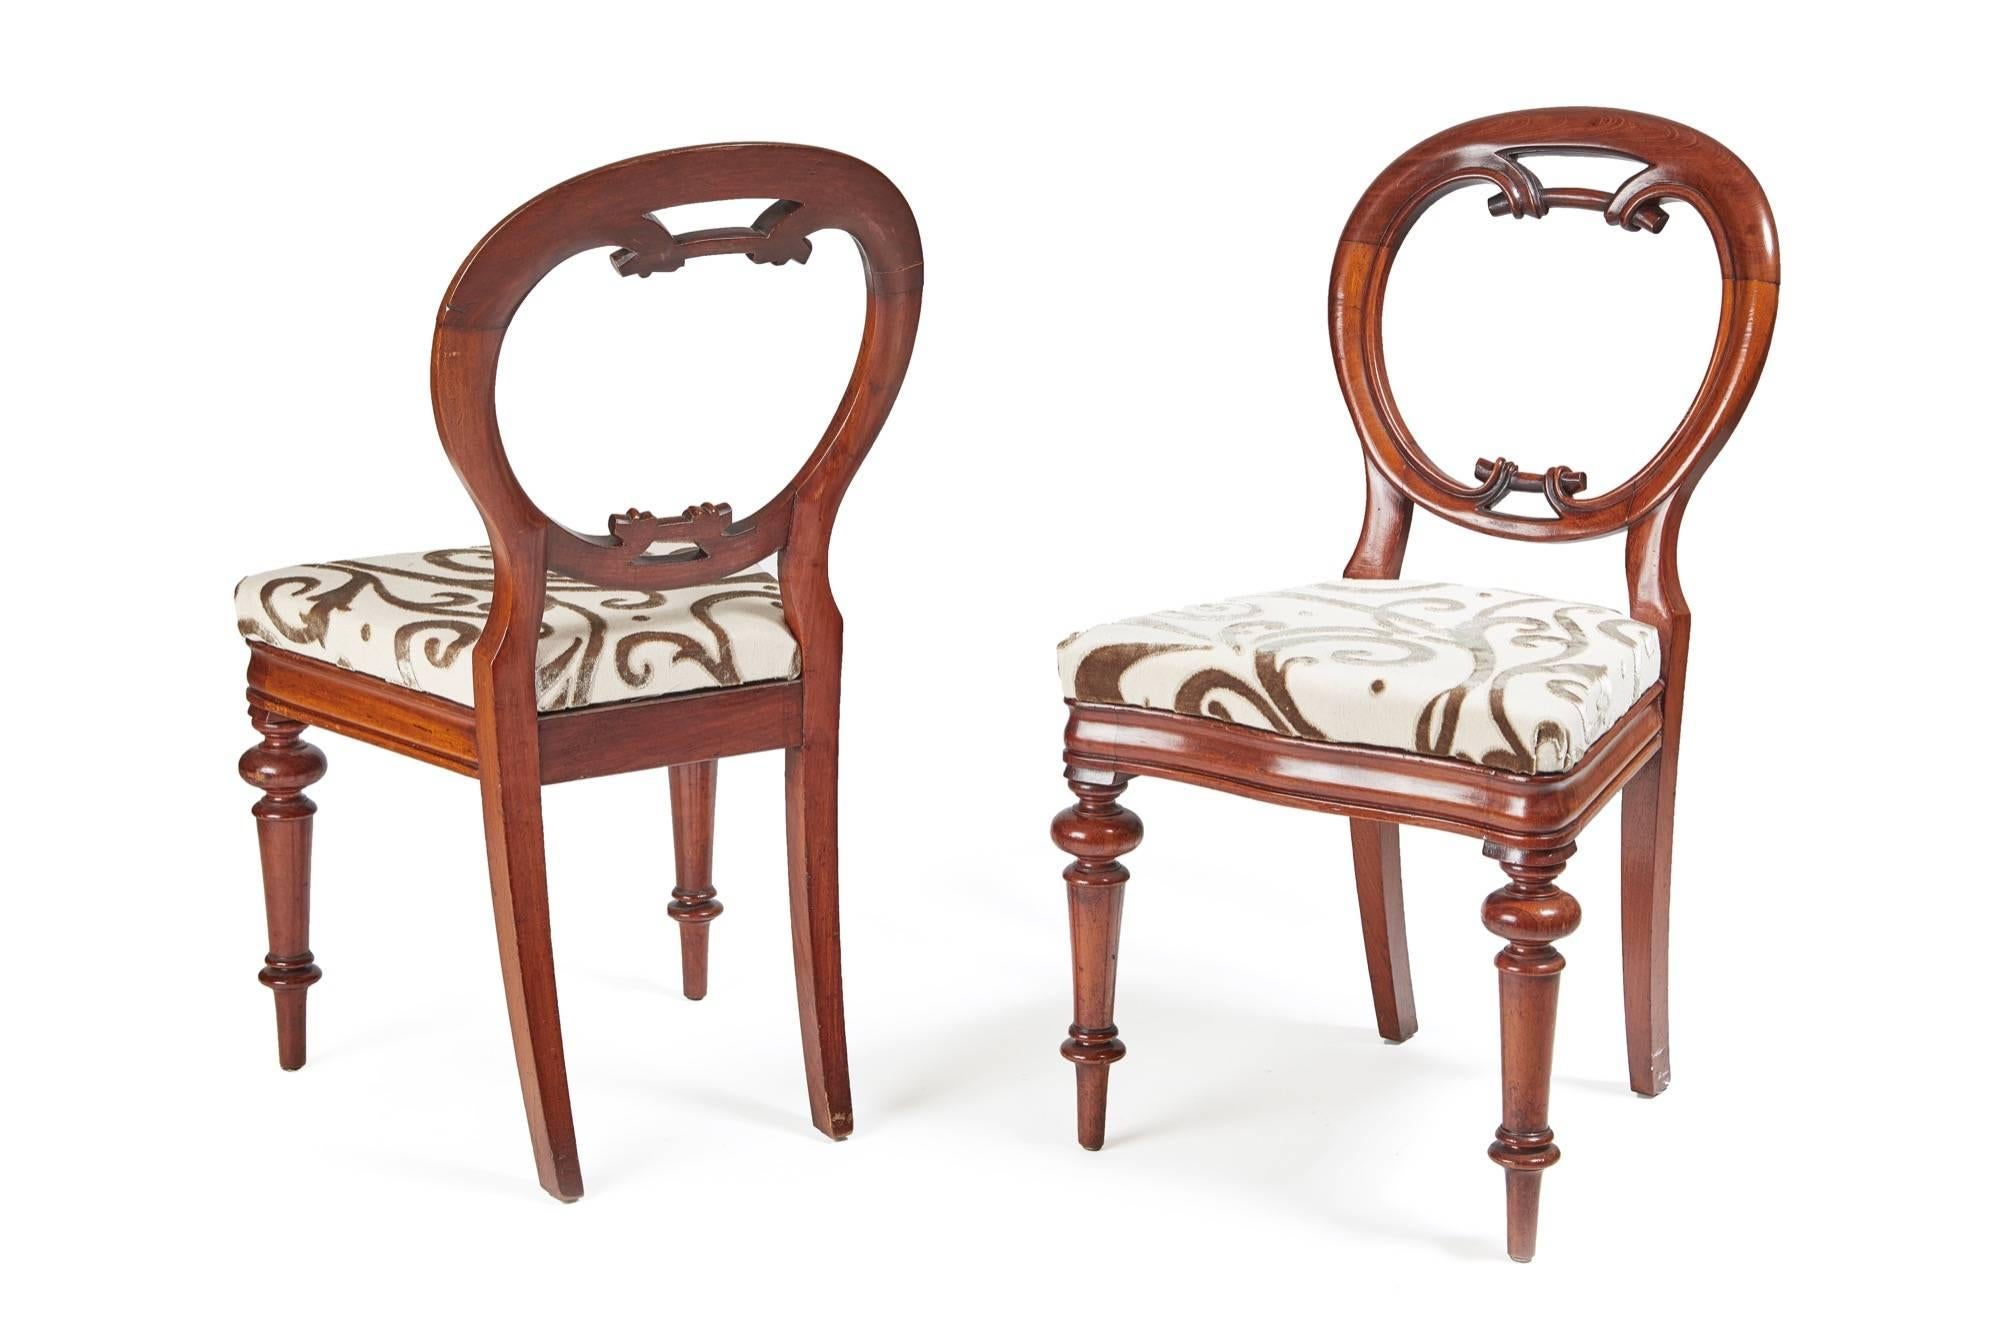 Superb set of six mahogany Victorian balloon back dining chairs, the circular back has a carved lower rail, standing on turned legs to the front and outswept back legs, the drop in seats have been newly re-upholstered,

circa 1860.

Measures: